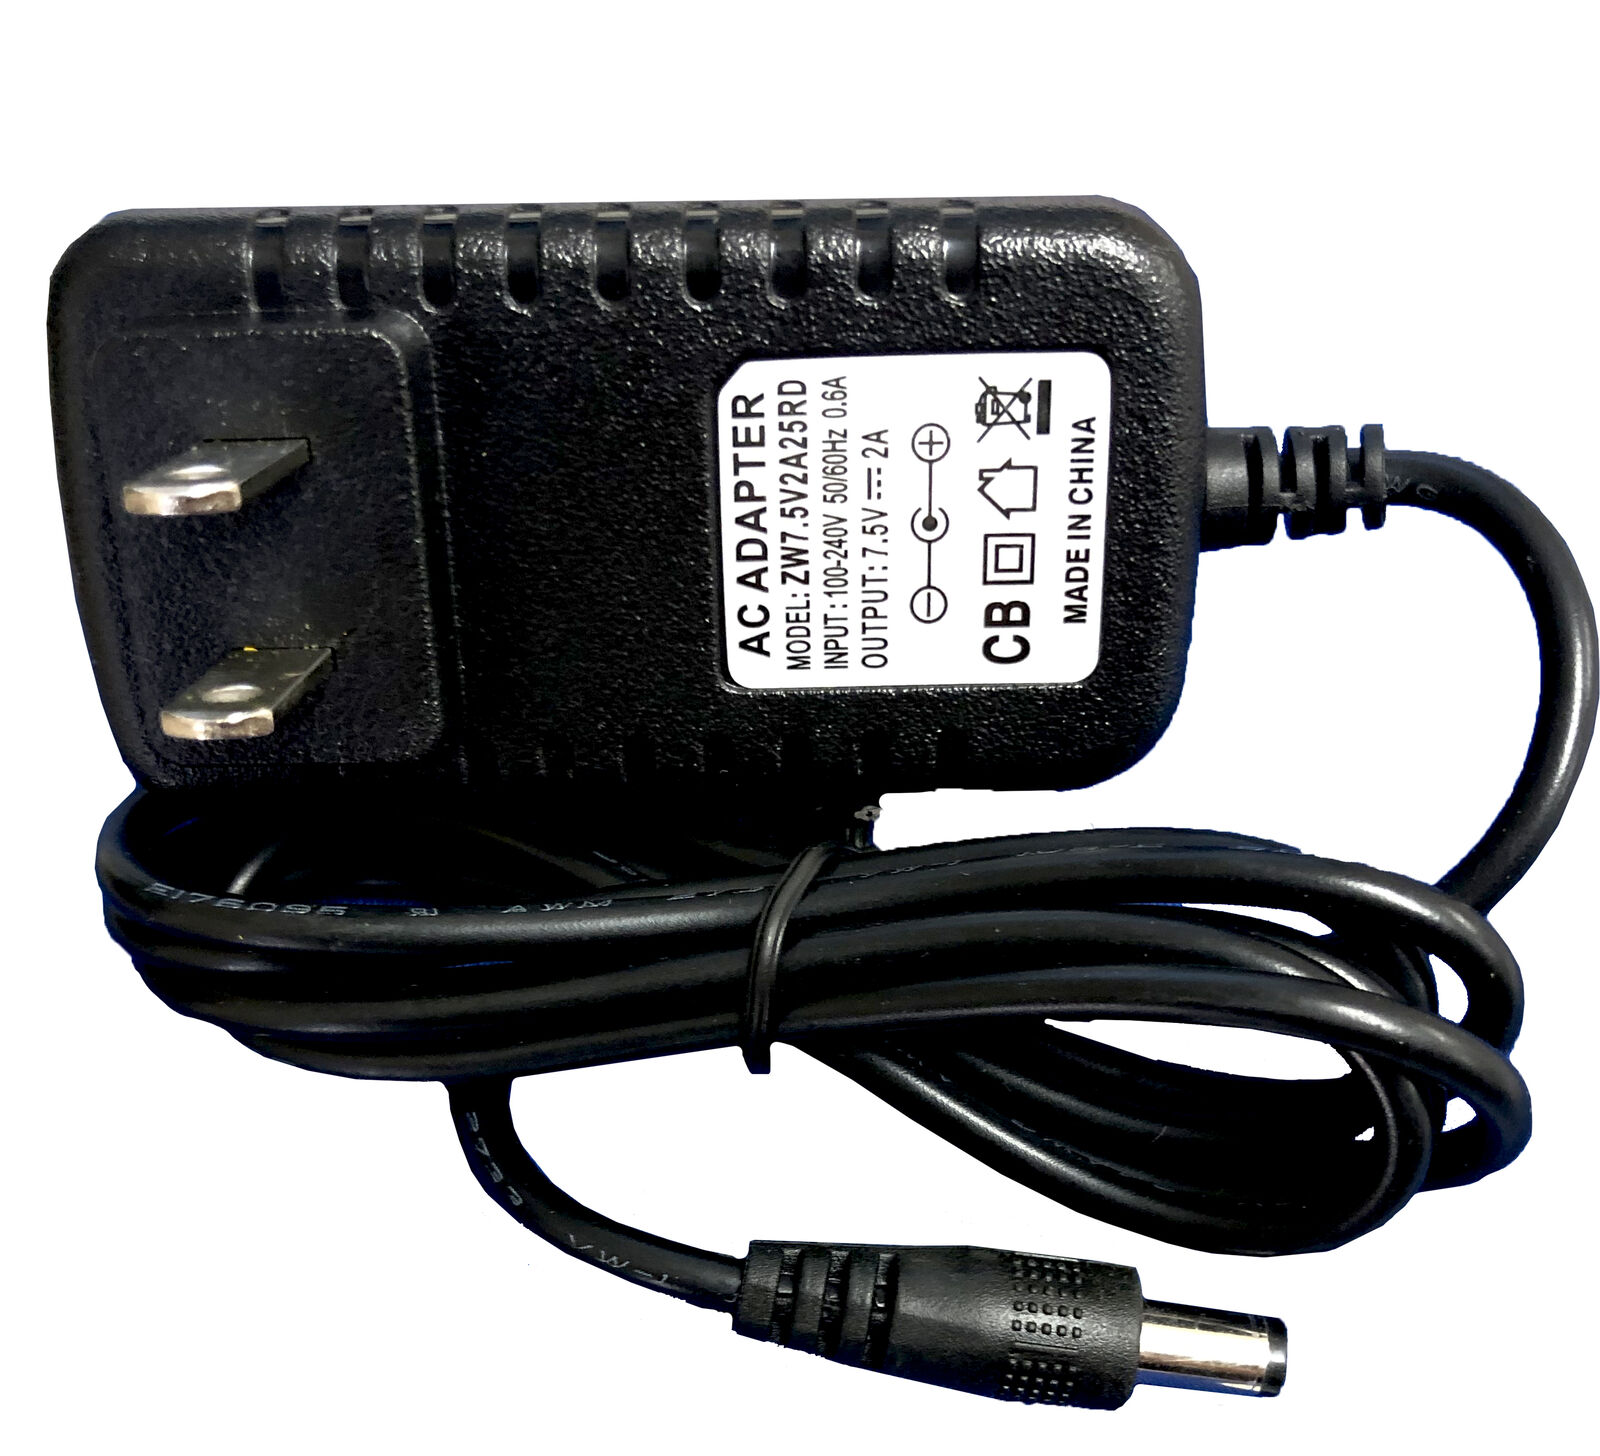 7.5V 2A 15W AC to DC Adapter Power supply charger For CASIO AD-1 SA-75 KEYBOARD 7.5V AC/DC Adapter Power For CASIO AD-1